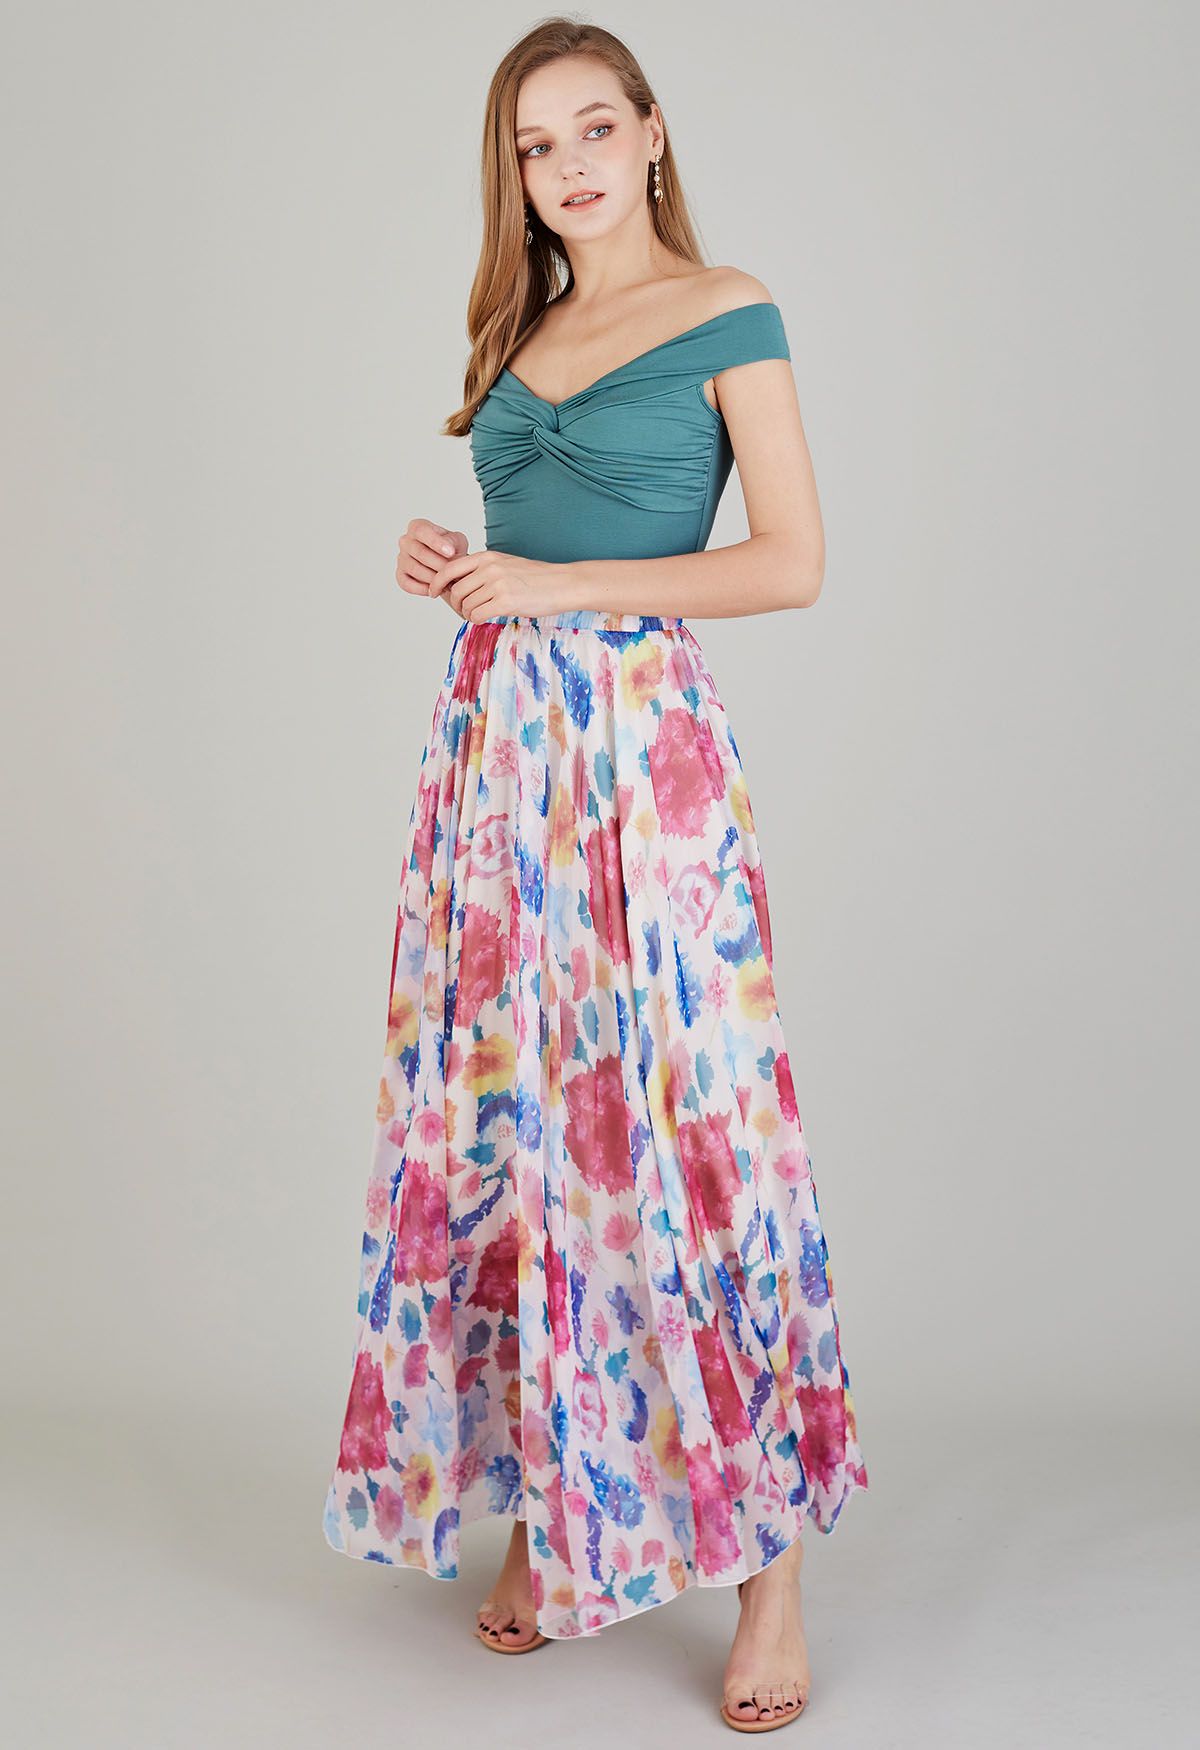 Colorful Blossom Printed Chiffon Maxi Skirt in Pink - Retro, Indie and ...